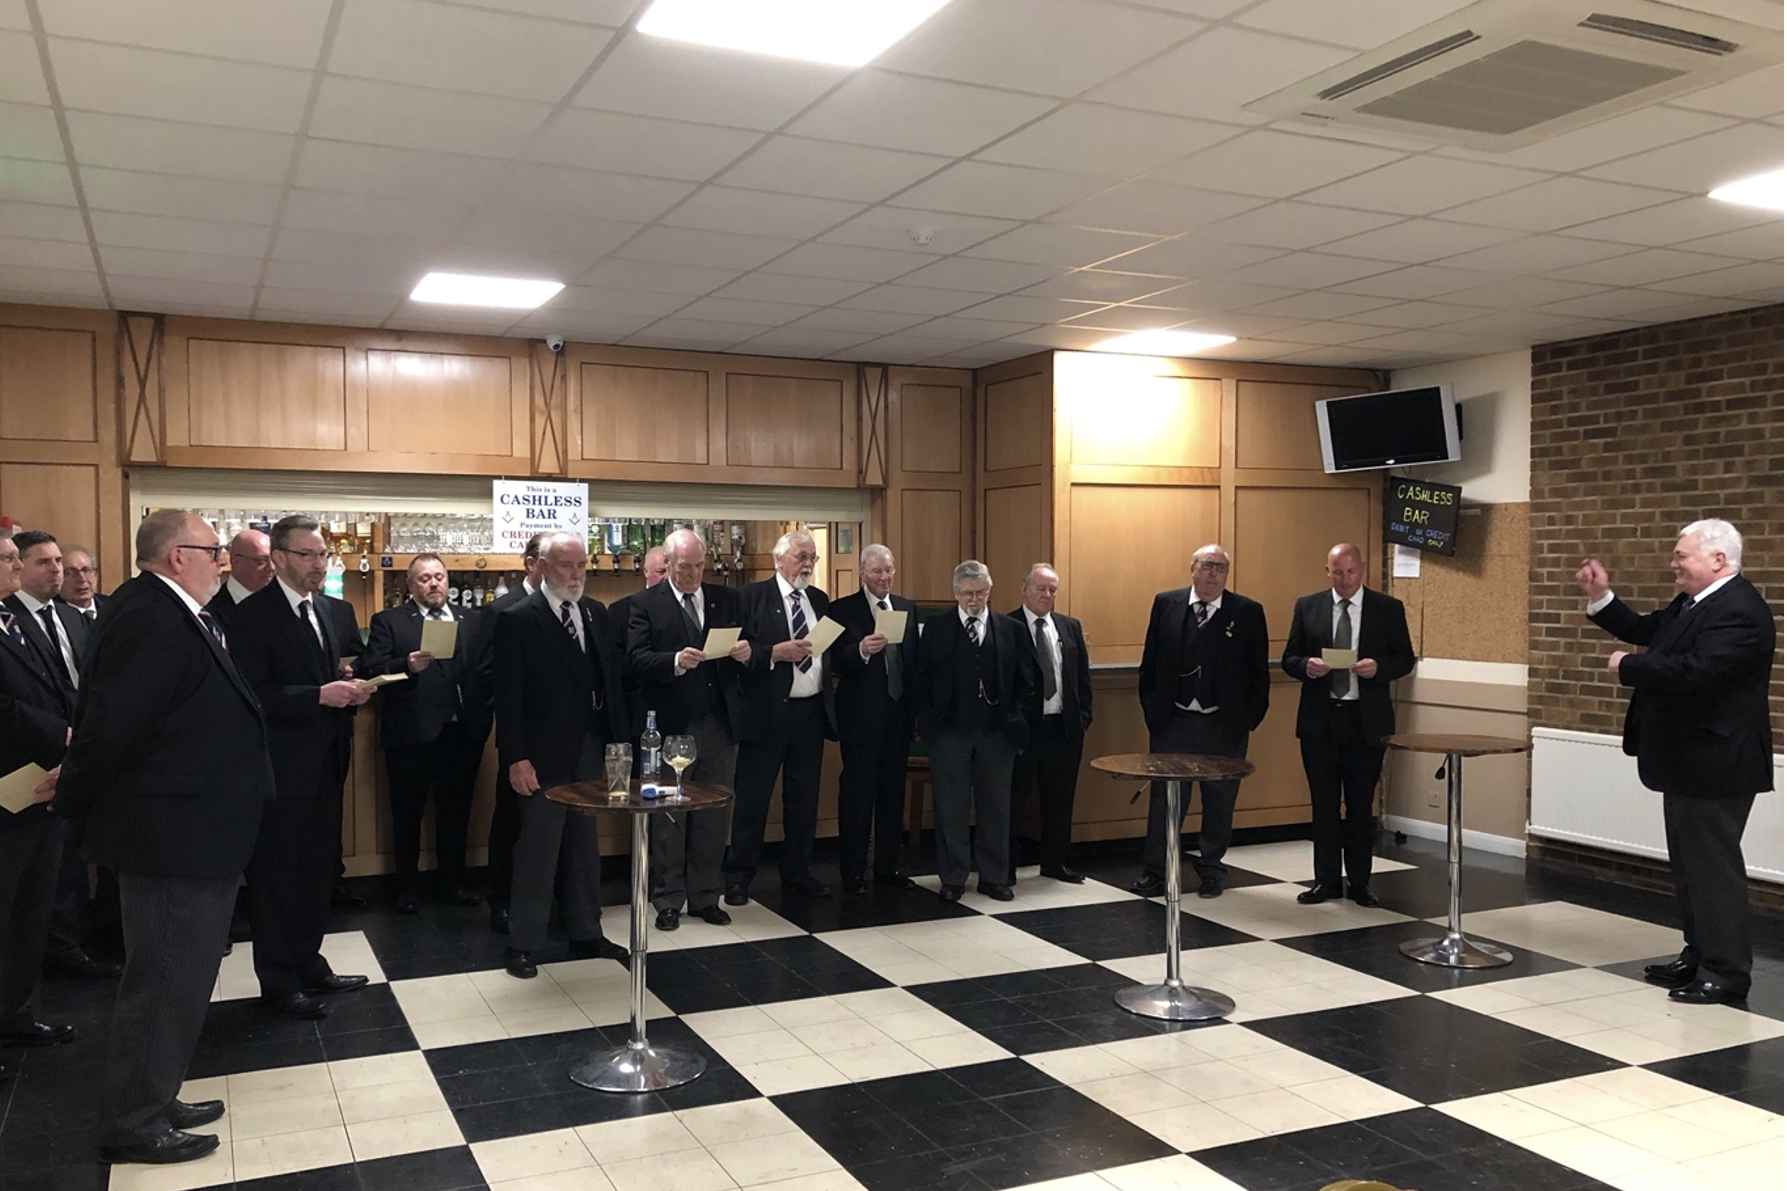 Provincial Grand Master ‘Conducts’ Robert Bloomfield Lodge